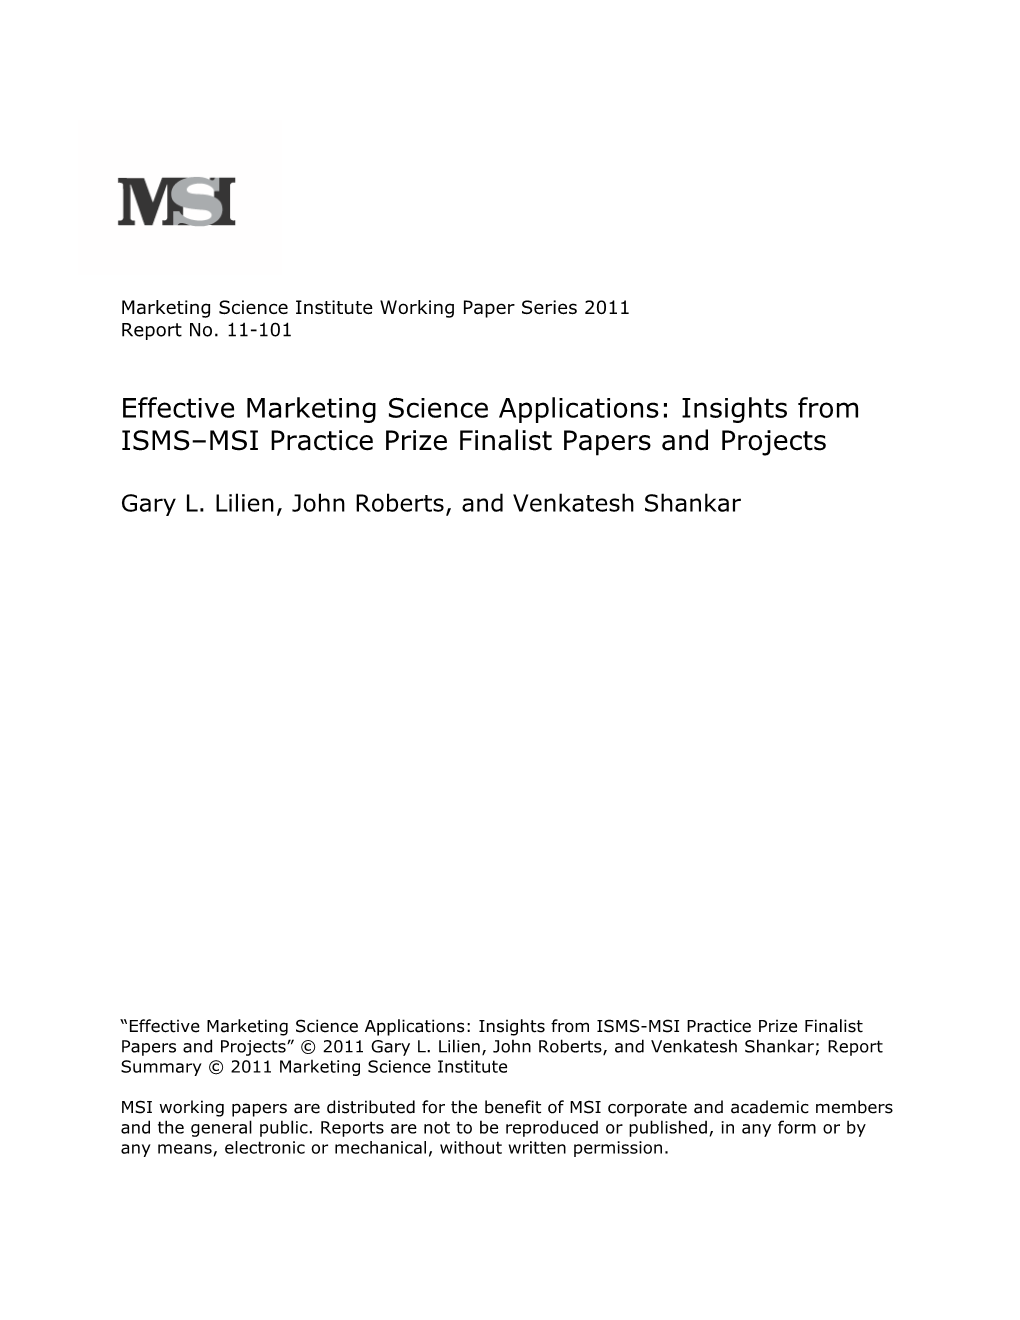 Effective Marketing Science Applications: Insights from ISMS–MSI Practice Prize Finalist Papers and Projects